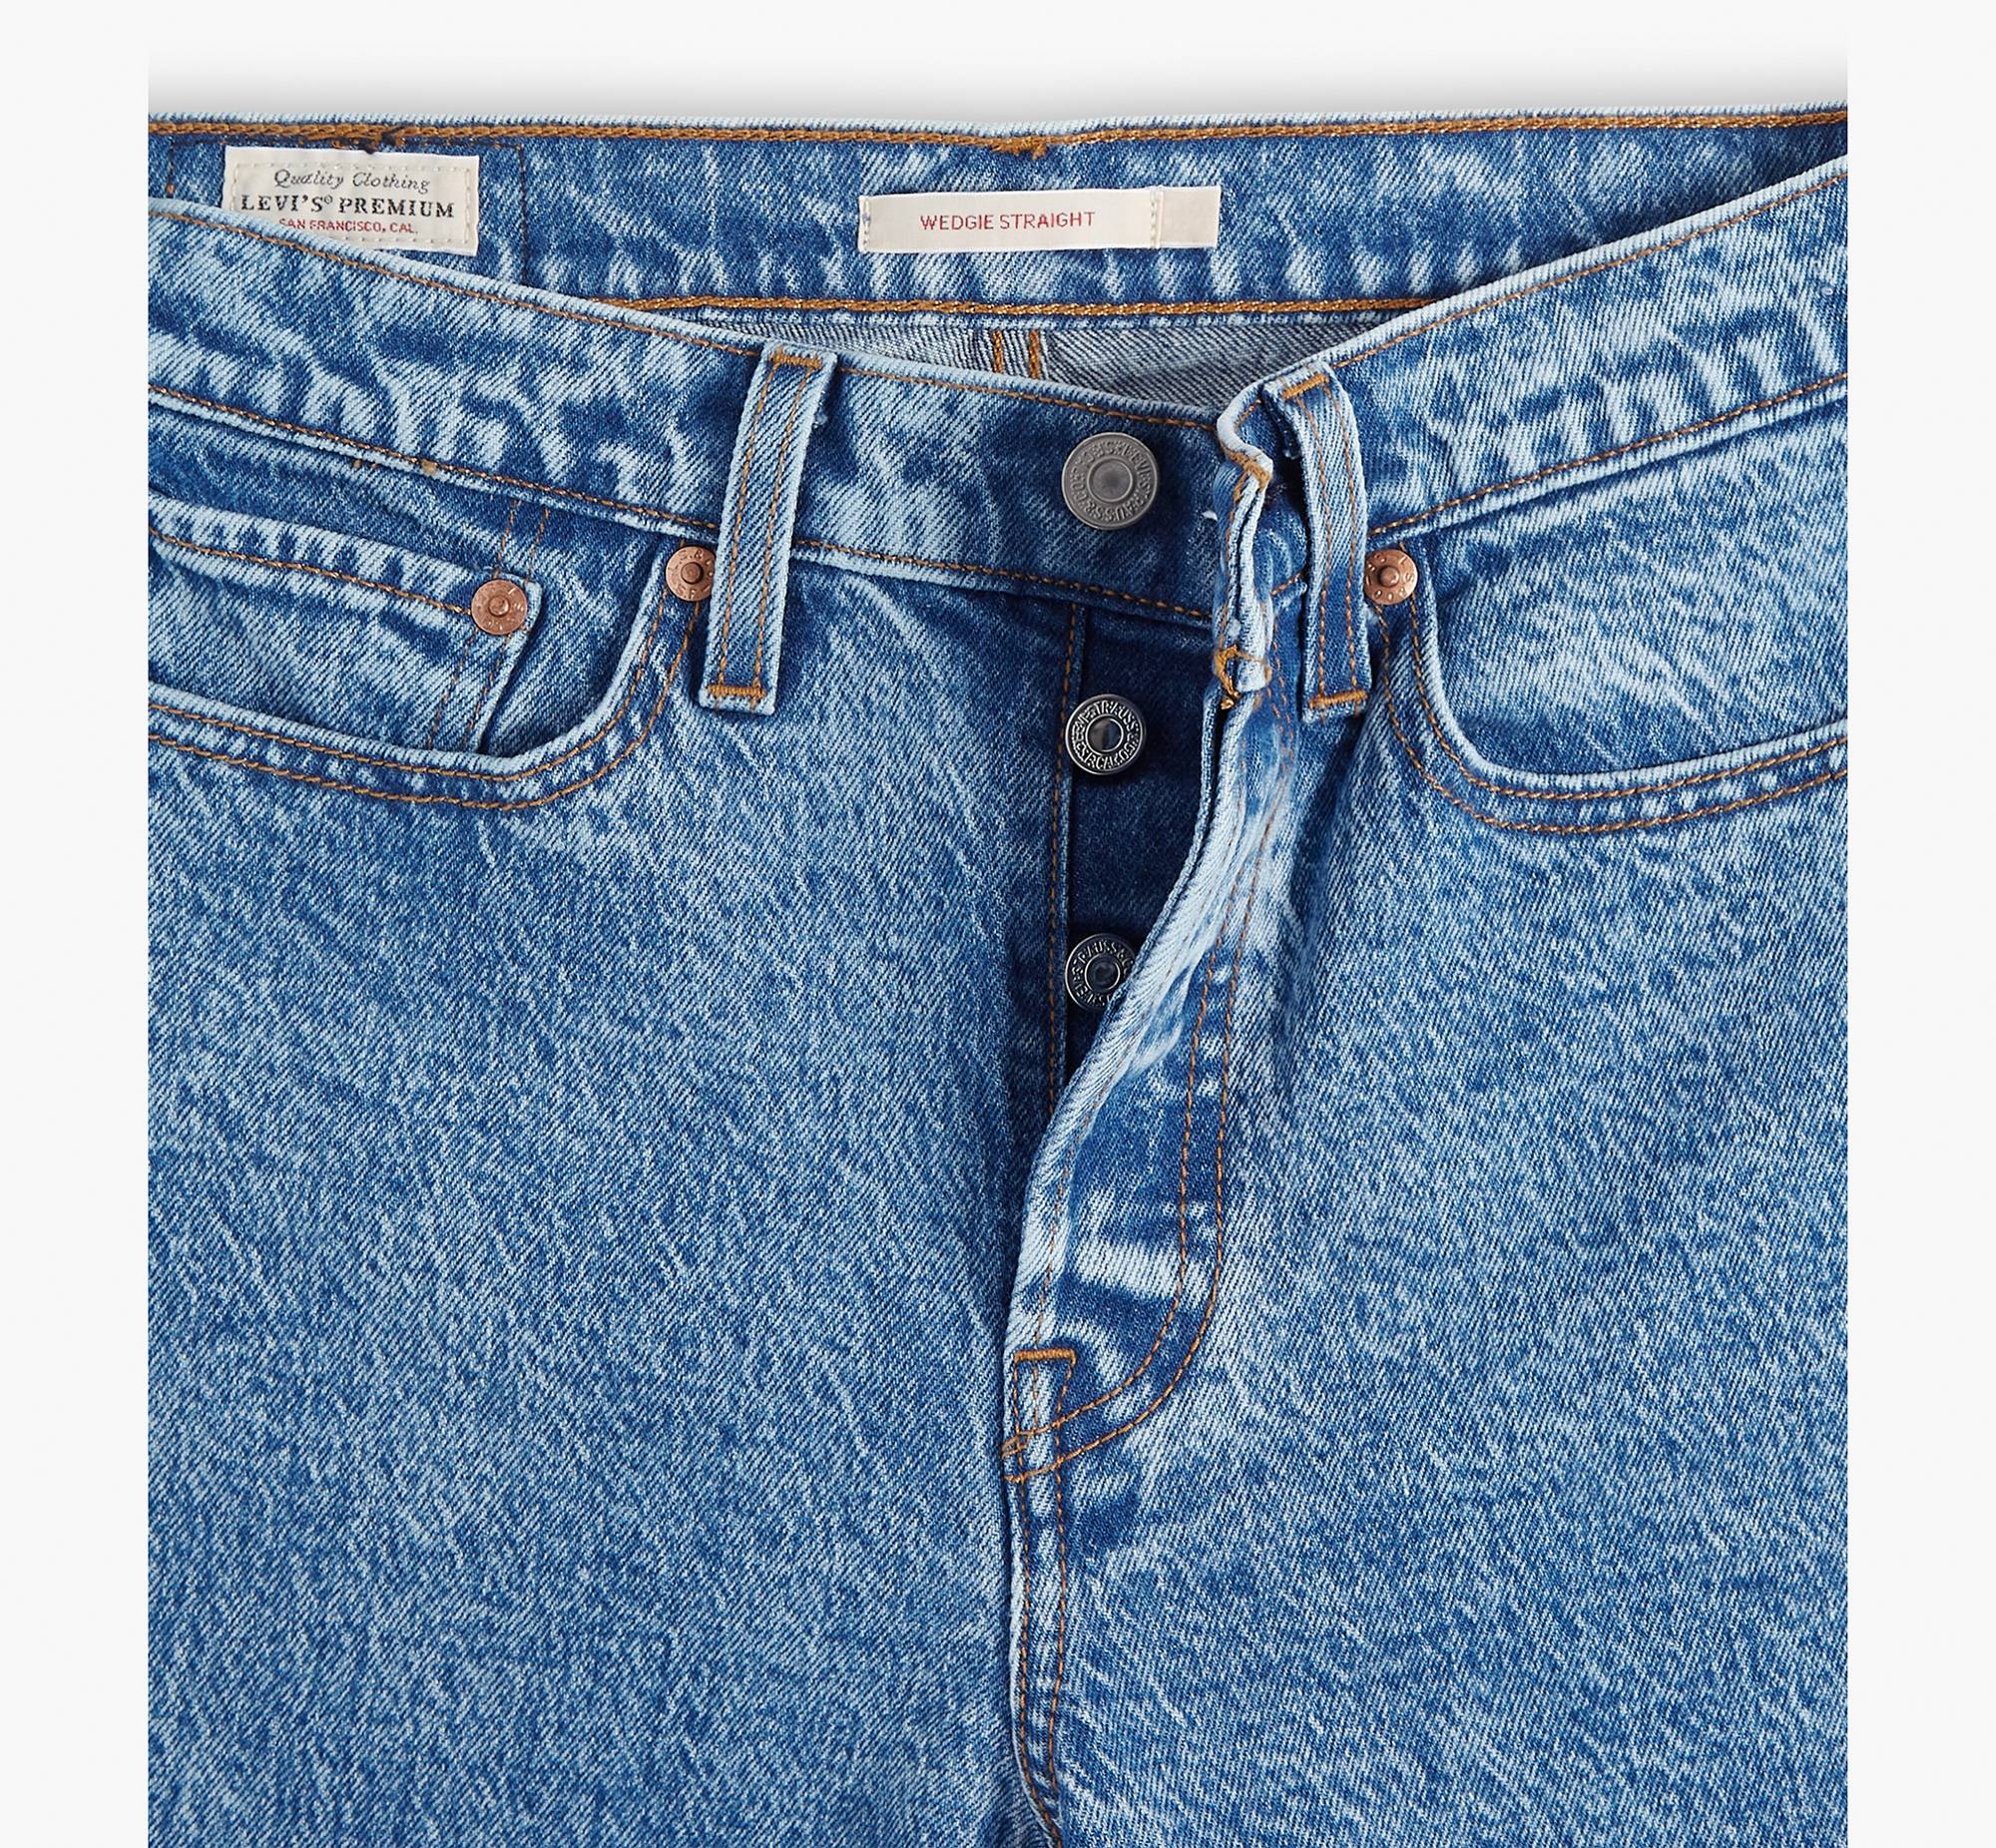 Wedgie Straight Jeans 8